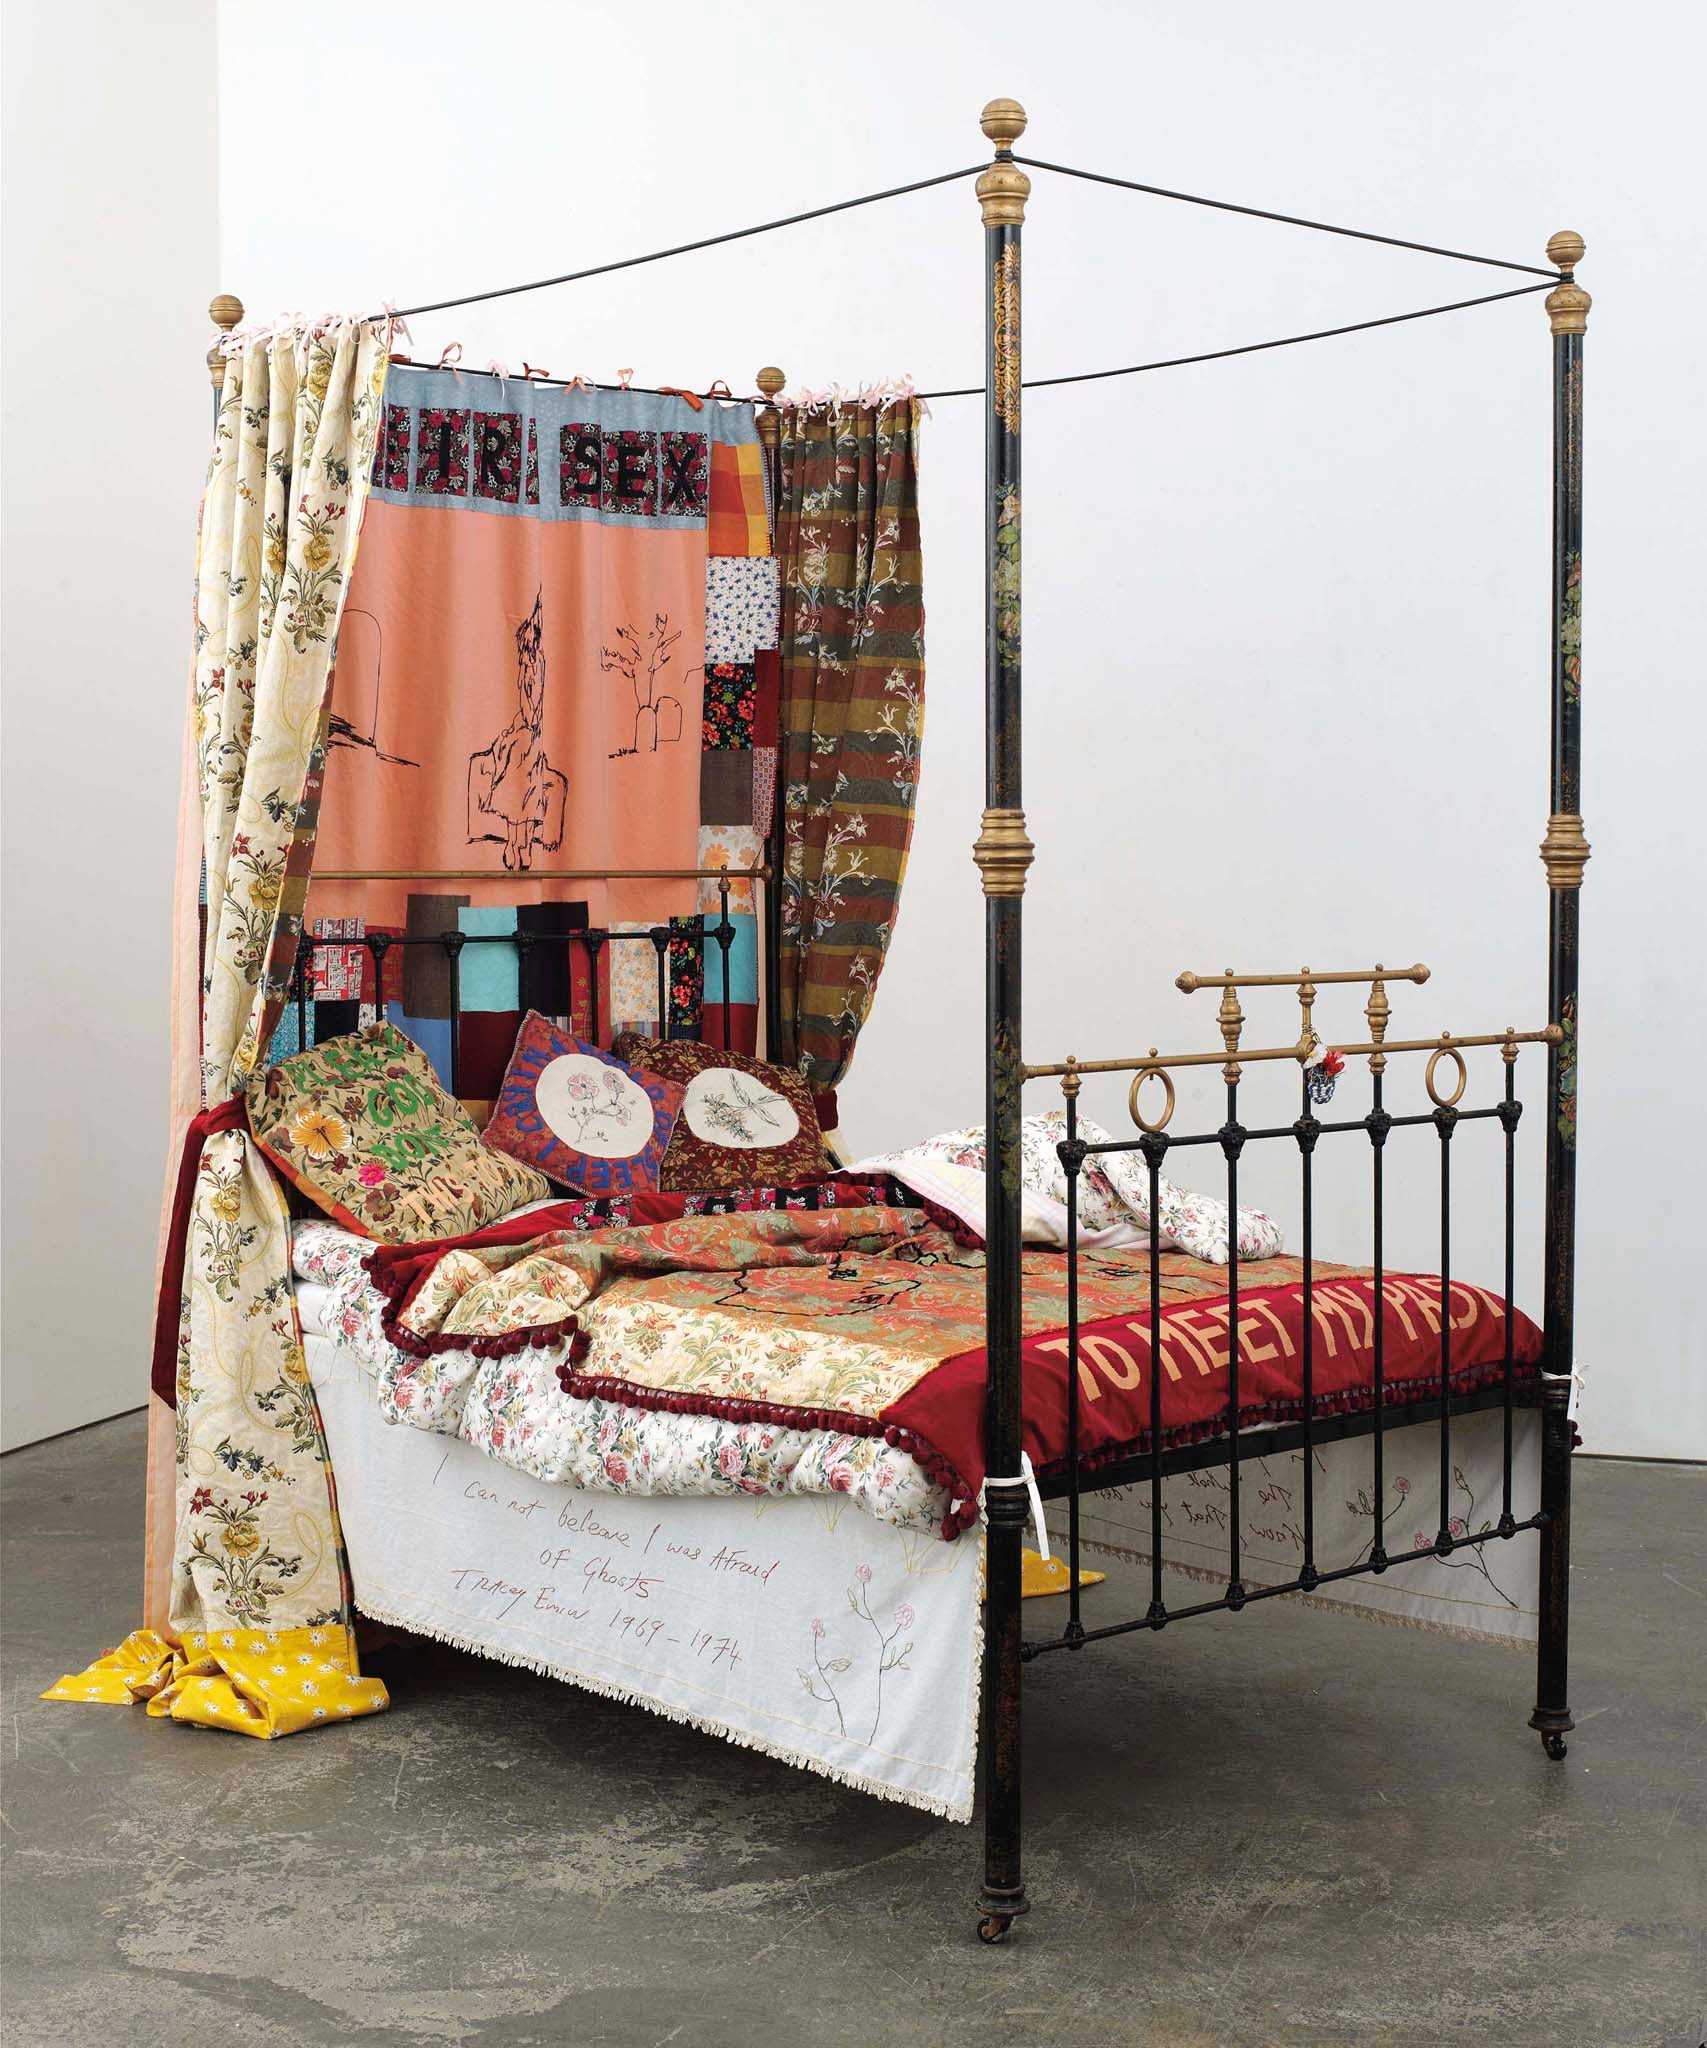 Tracey Emin (b. 1963), To Meet My Past -
four poster bed, mattress, appliquéd linens and curtains.
Executed in 2002.